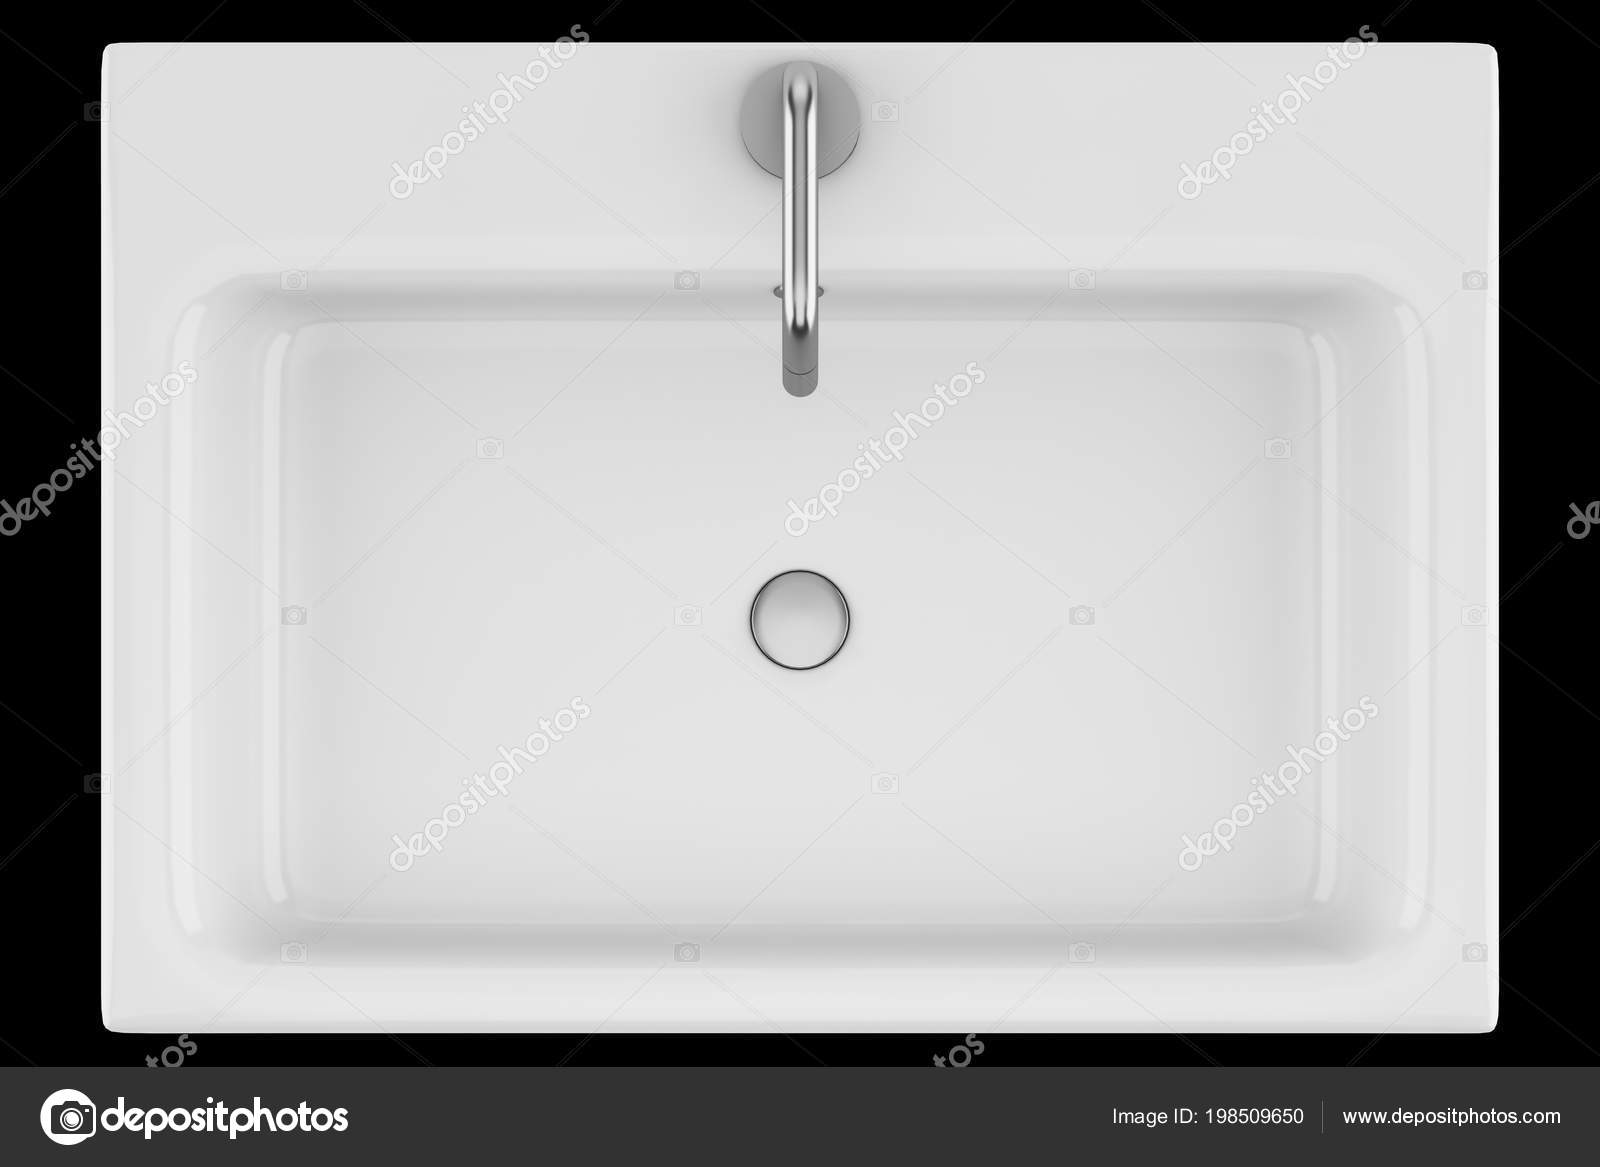 Top View Ceramic Bathroom Sink Isolated Black Background Illustration Stock Photo